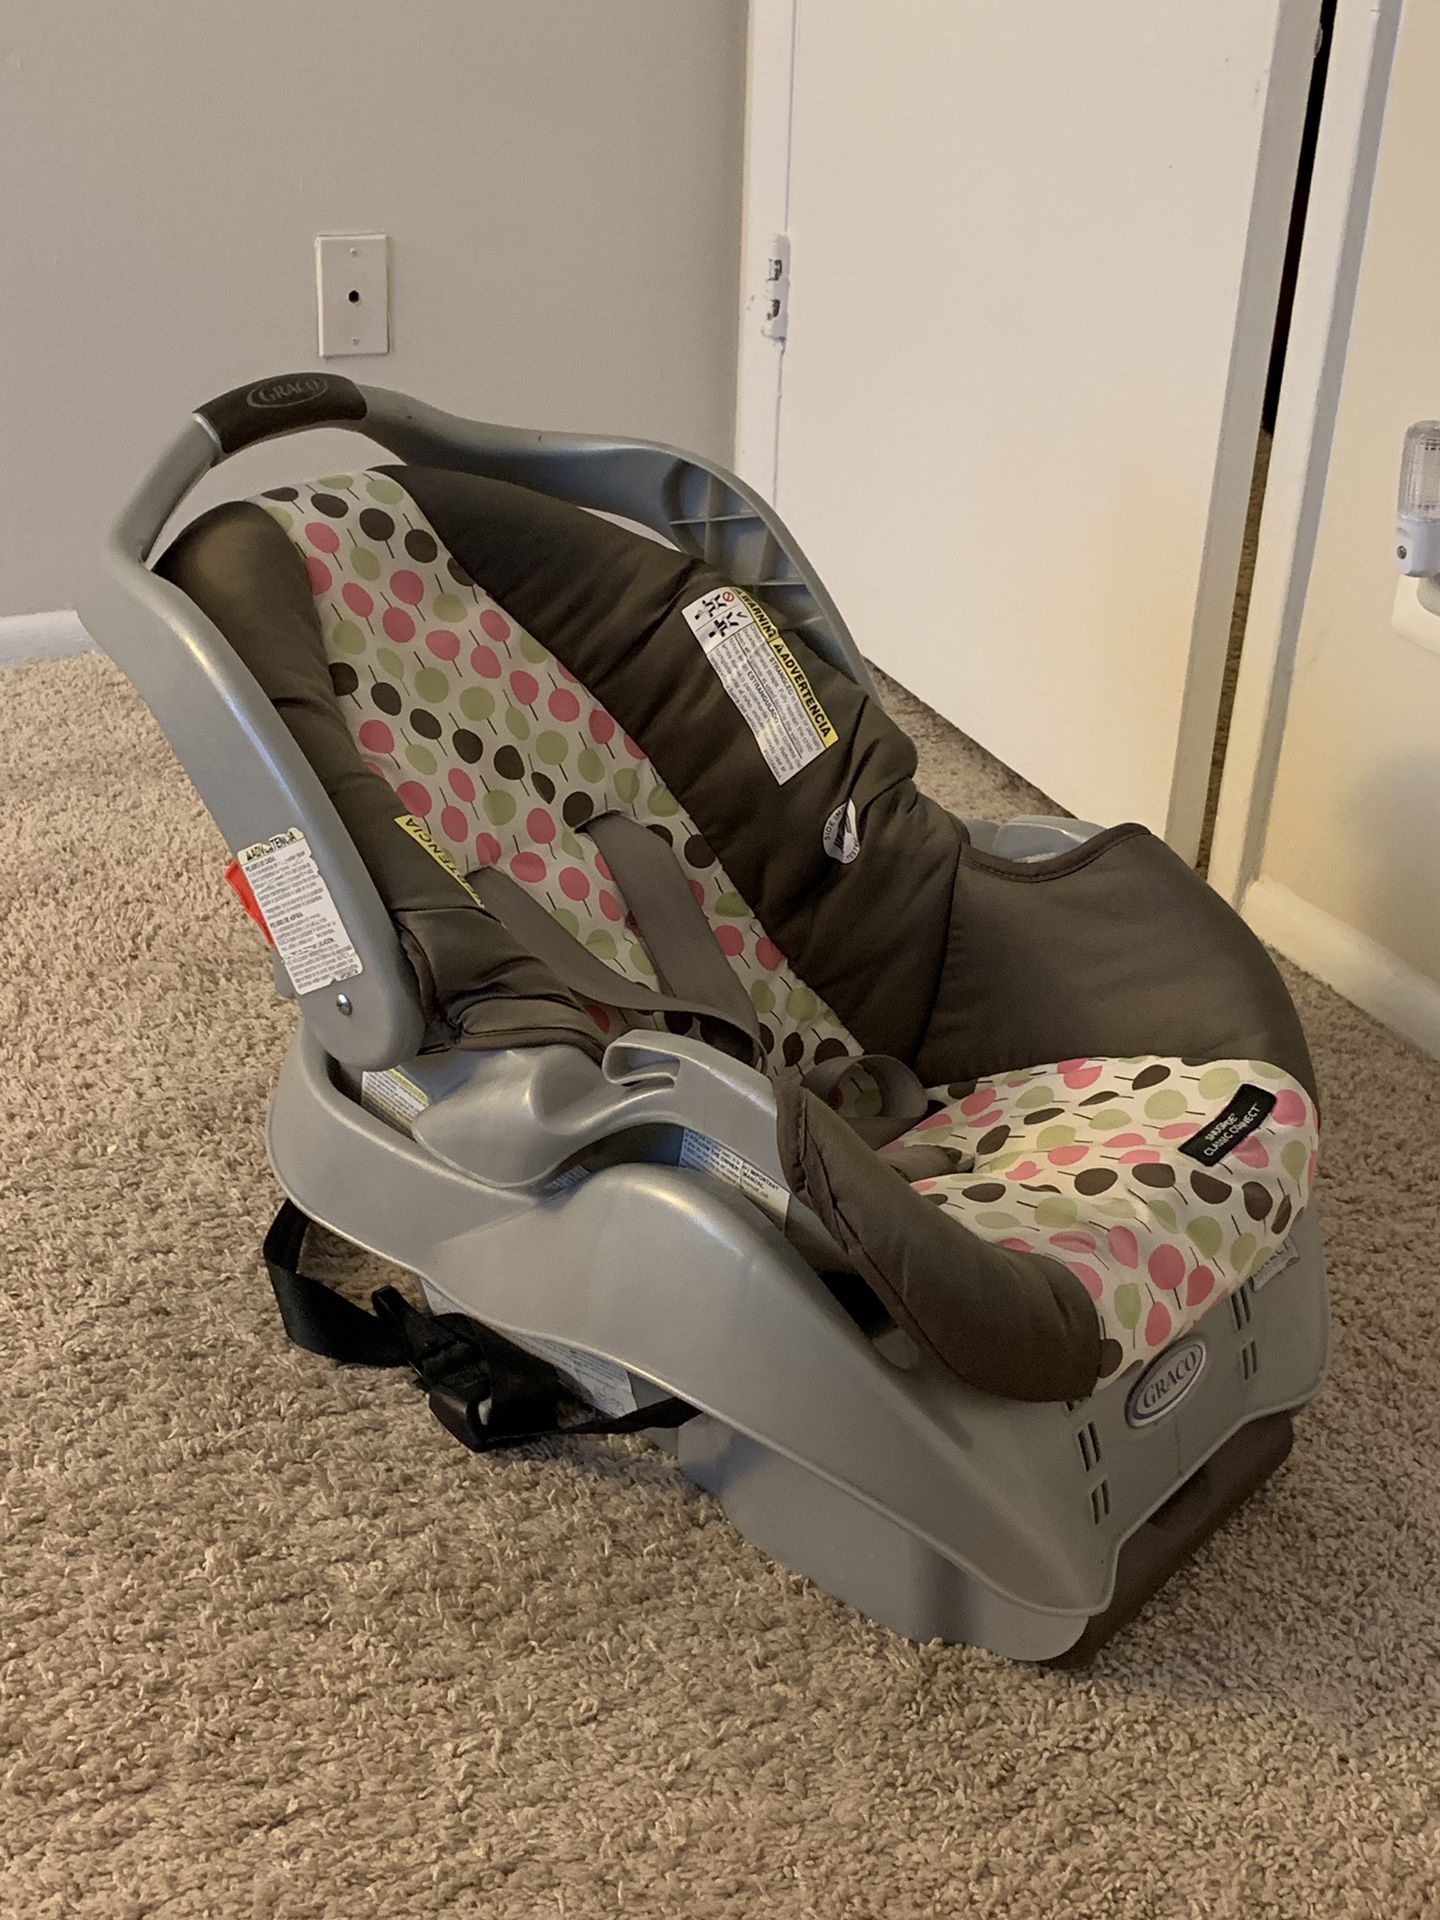 Graco car seat with an option of an additional base